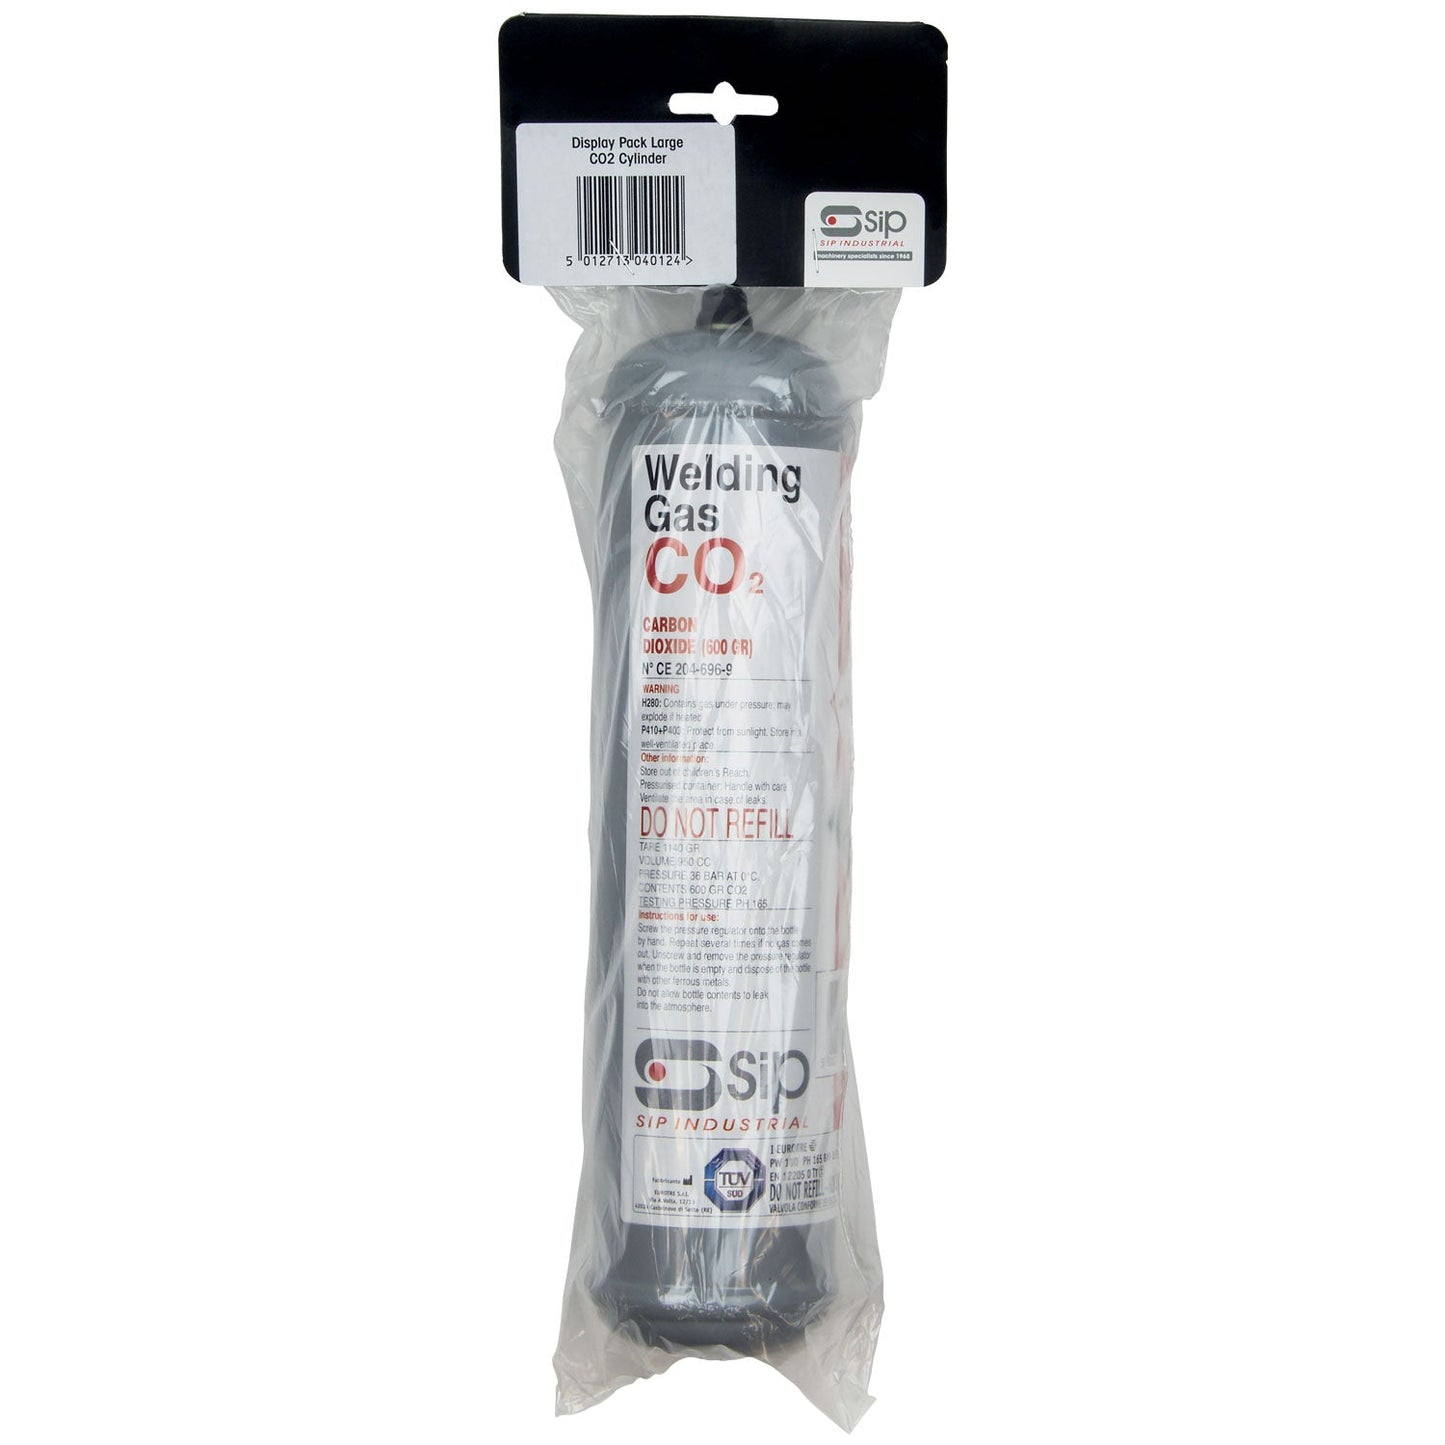 SIP 390g CO2 Disposable Gas Bottle Pack, Sip Industrial